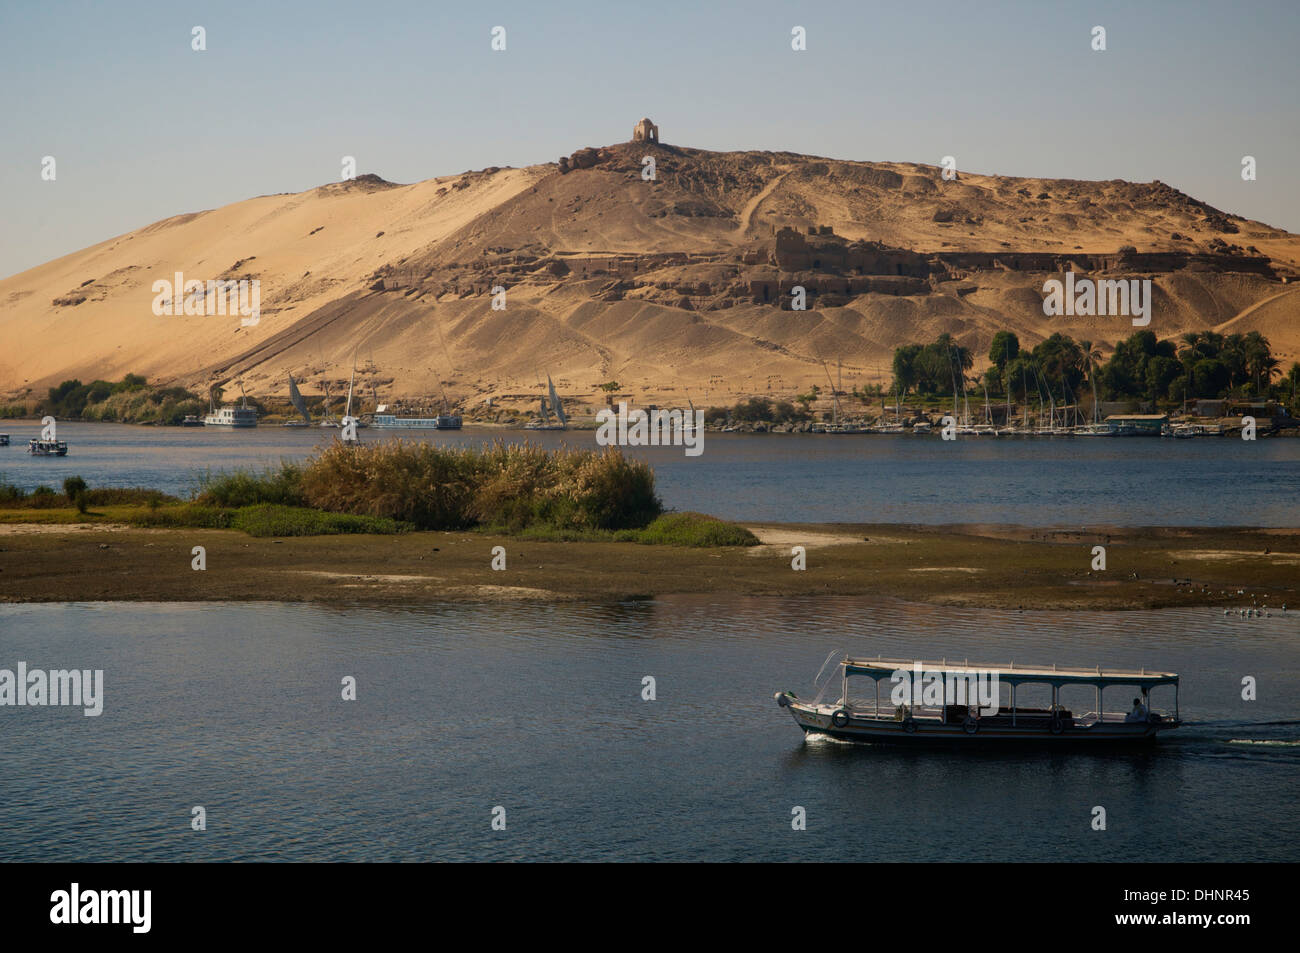 View across the Nile at Aswan to Qubbet al Hawa atop the far slope. Stock Photo